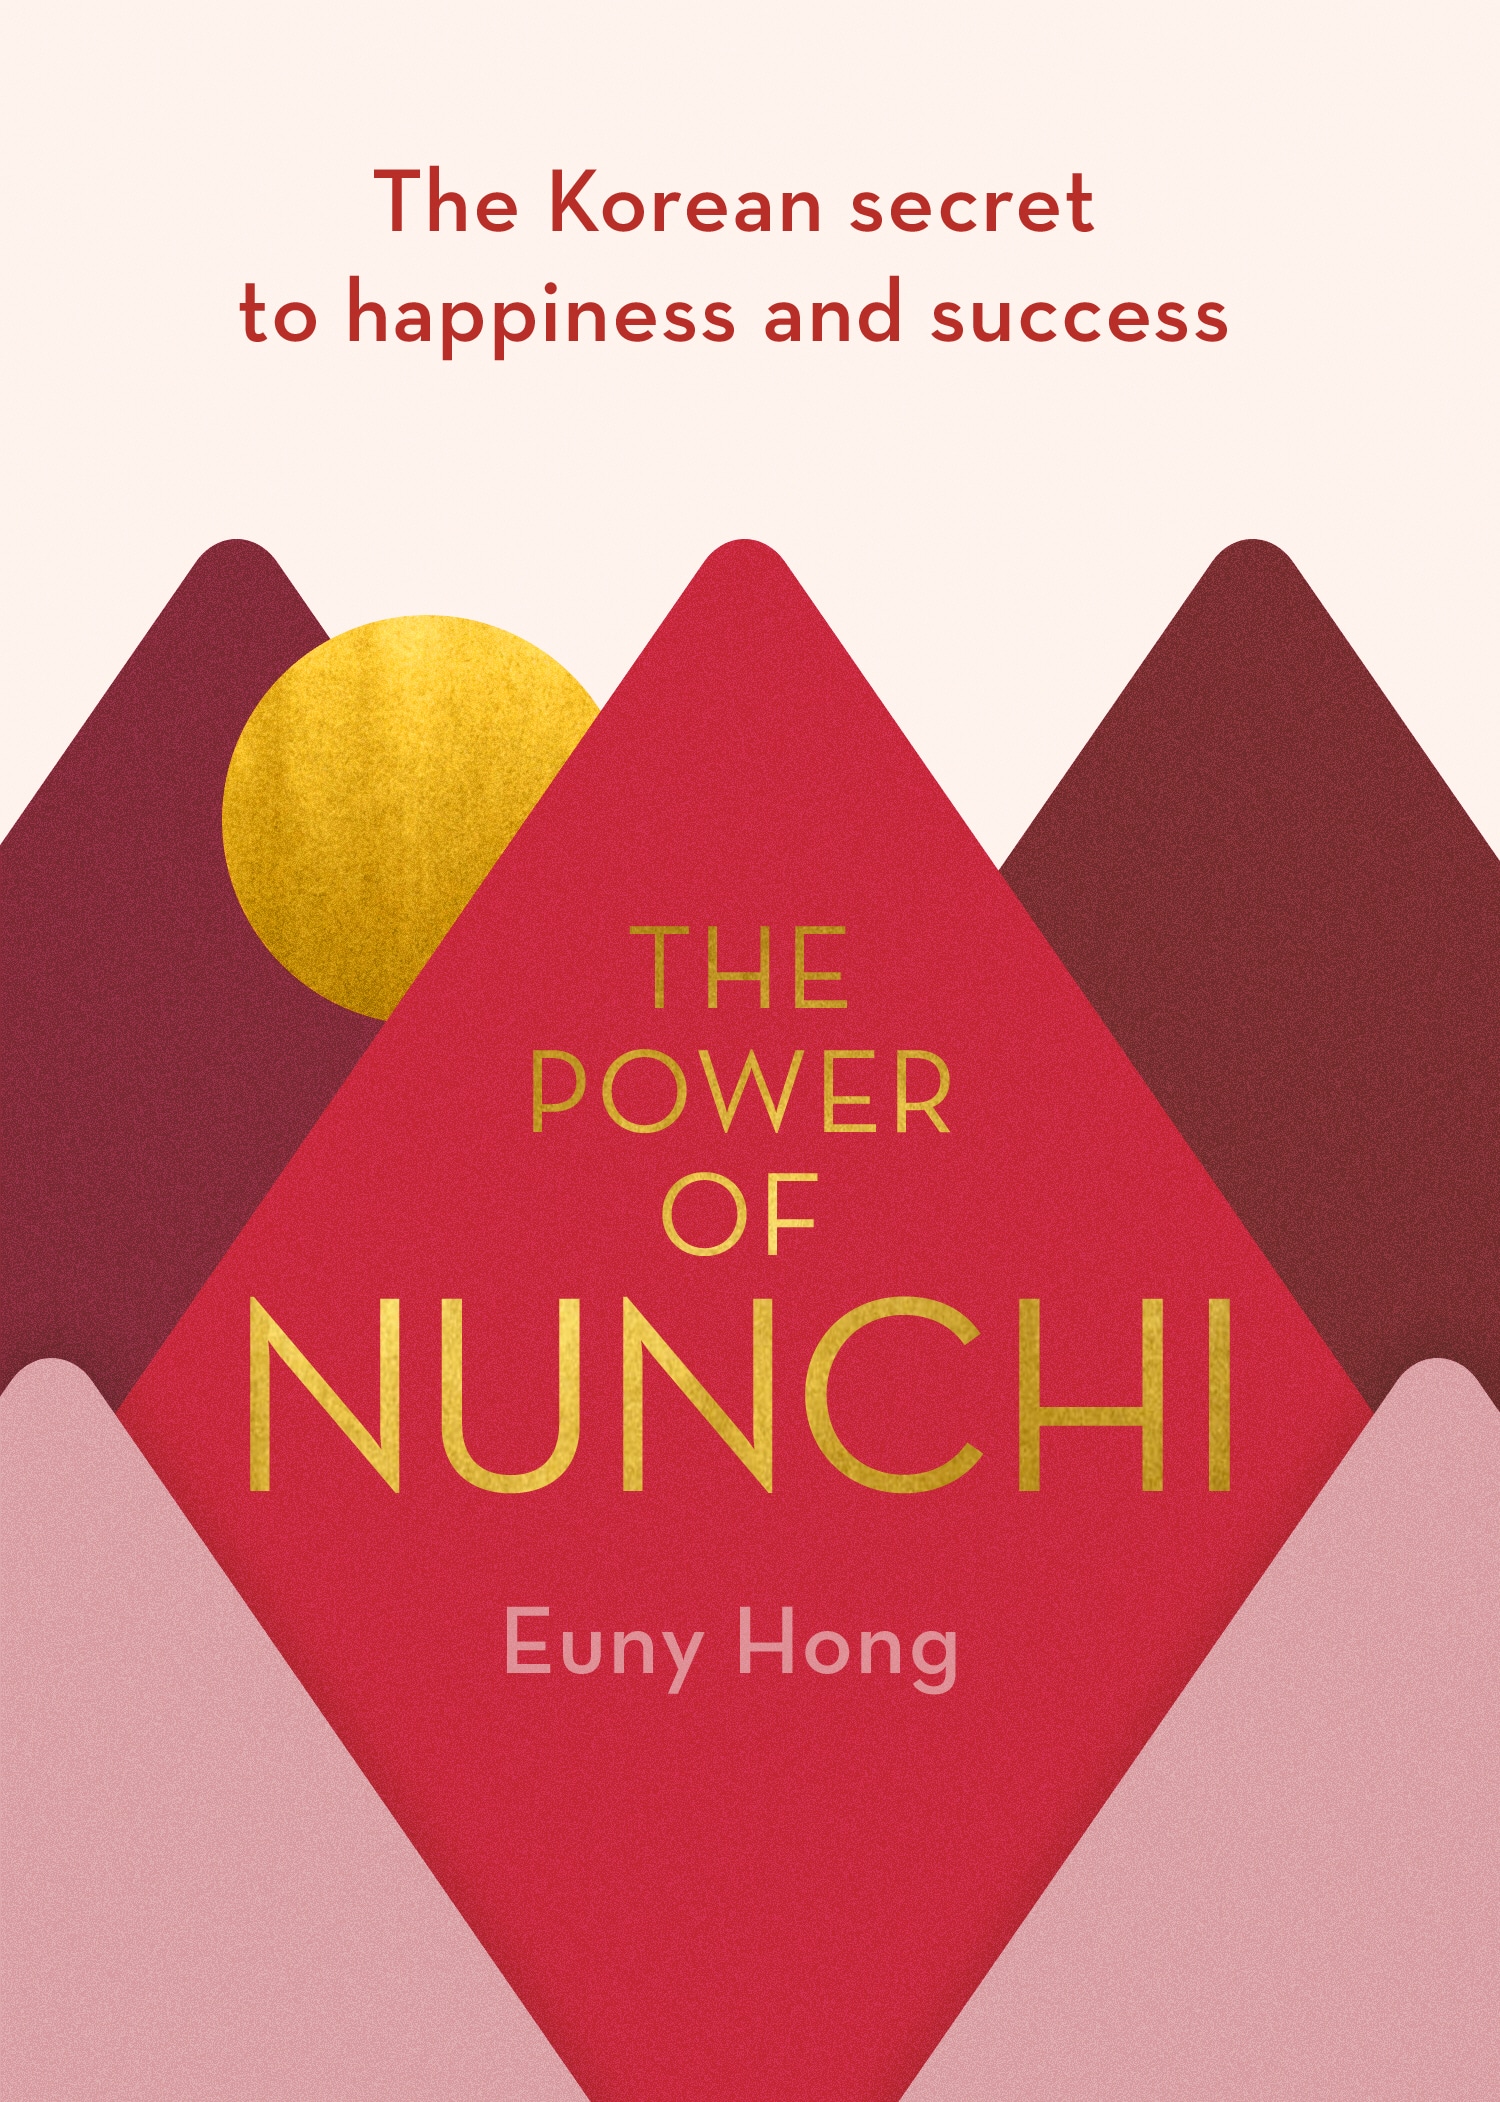 Book “The Power of Nunchi” by Euny Hong — September 5, 2019